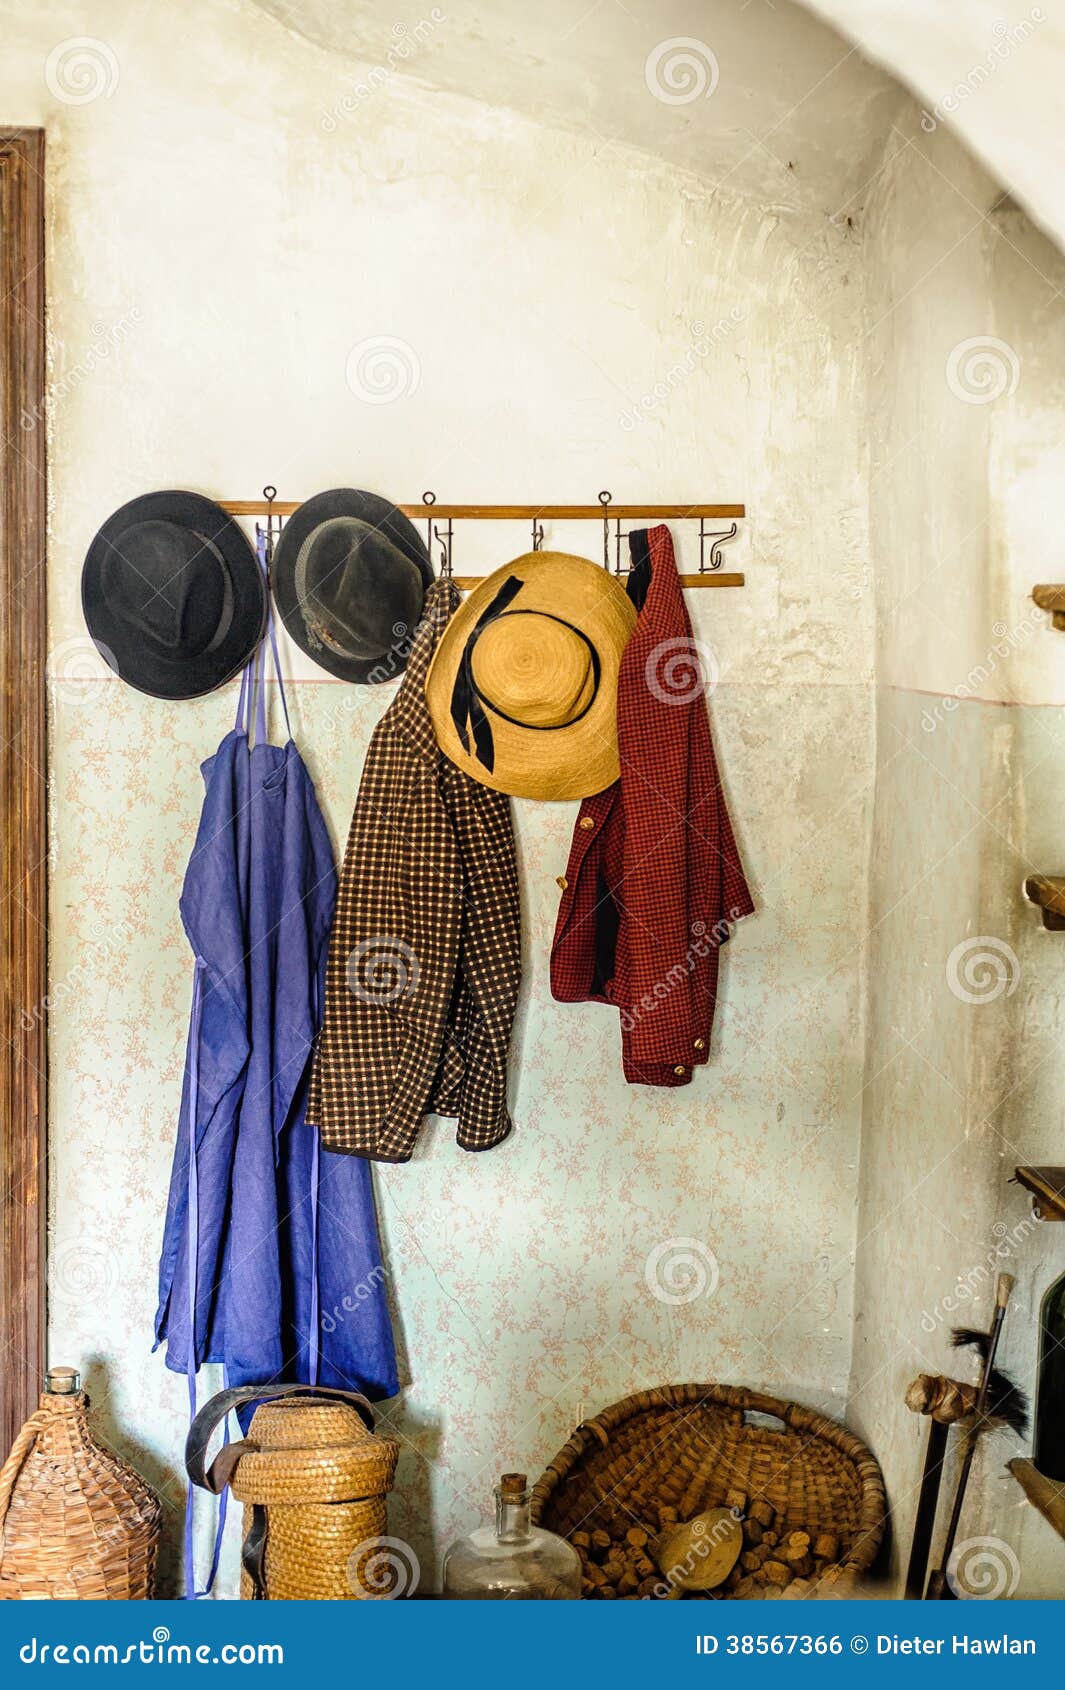 rural cloakroom with clothes